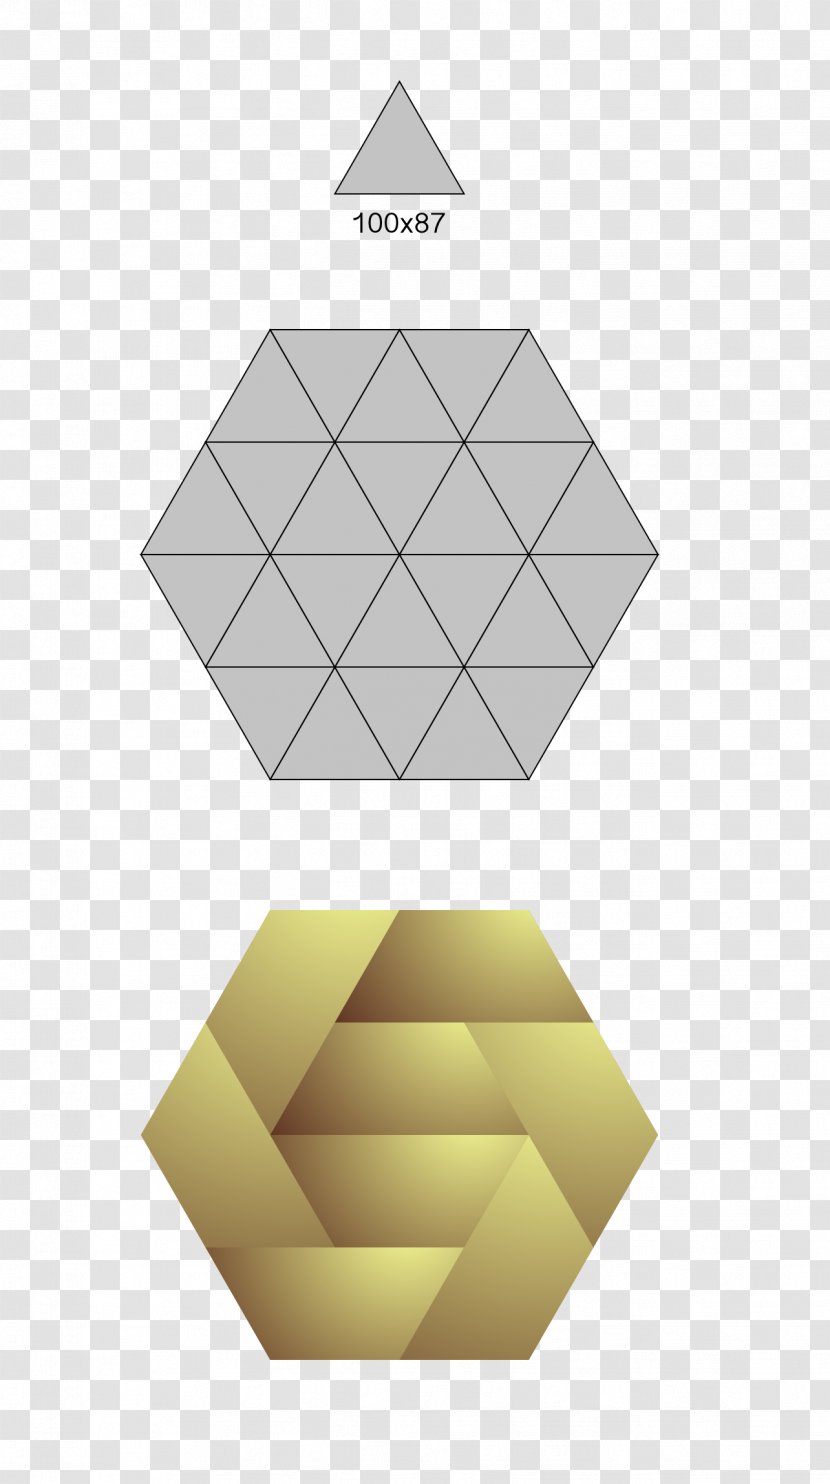 Polygon Equilateral Triangle Hexagon - Trapezoidal Transparent PNG